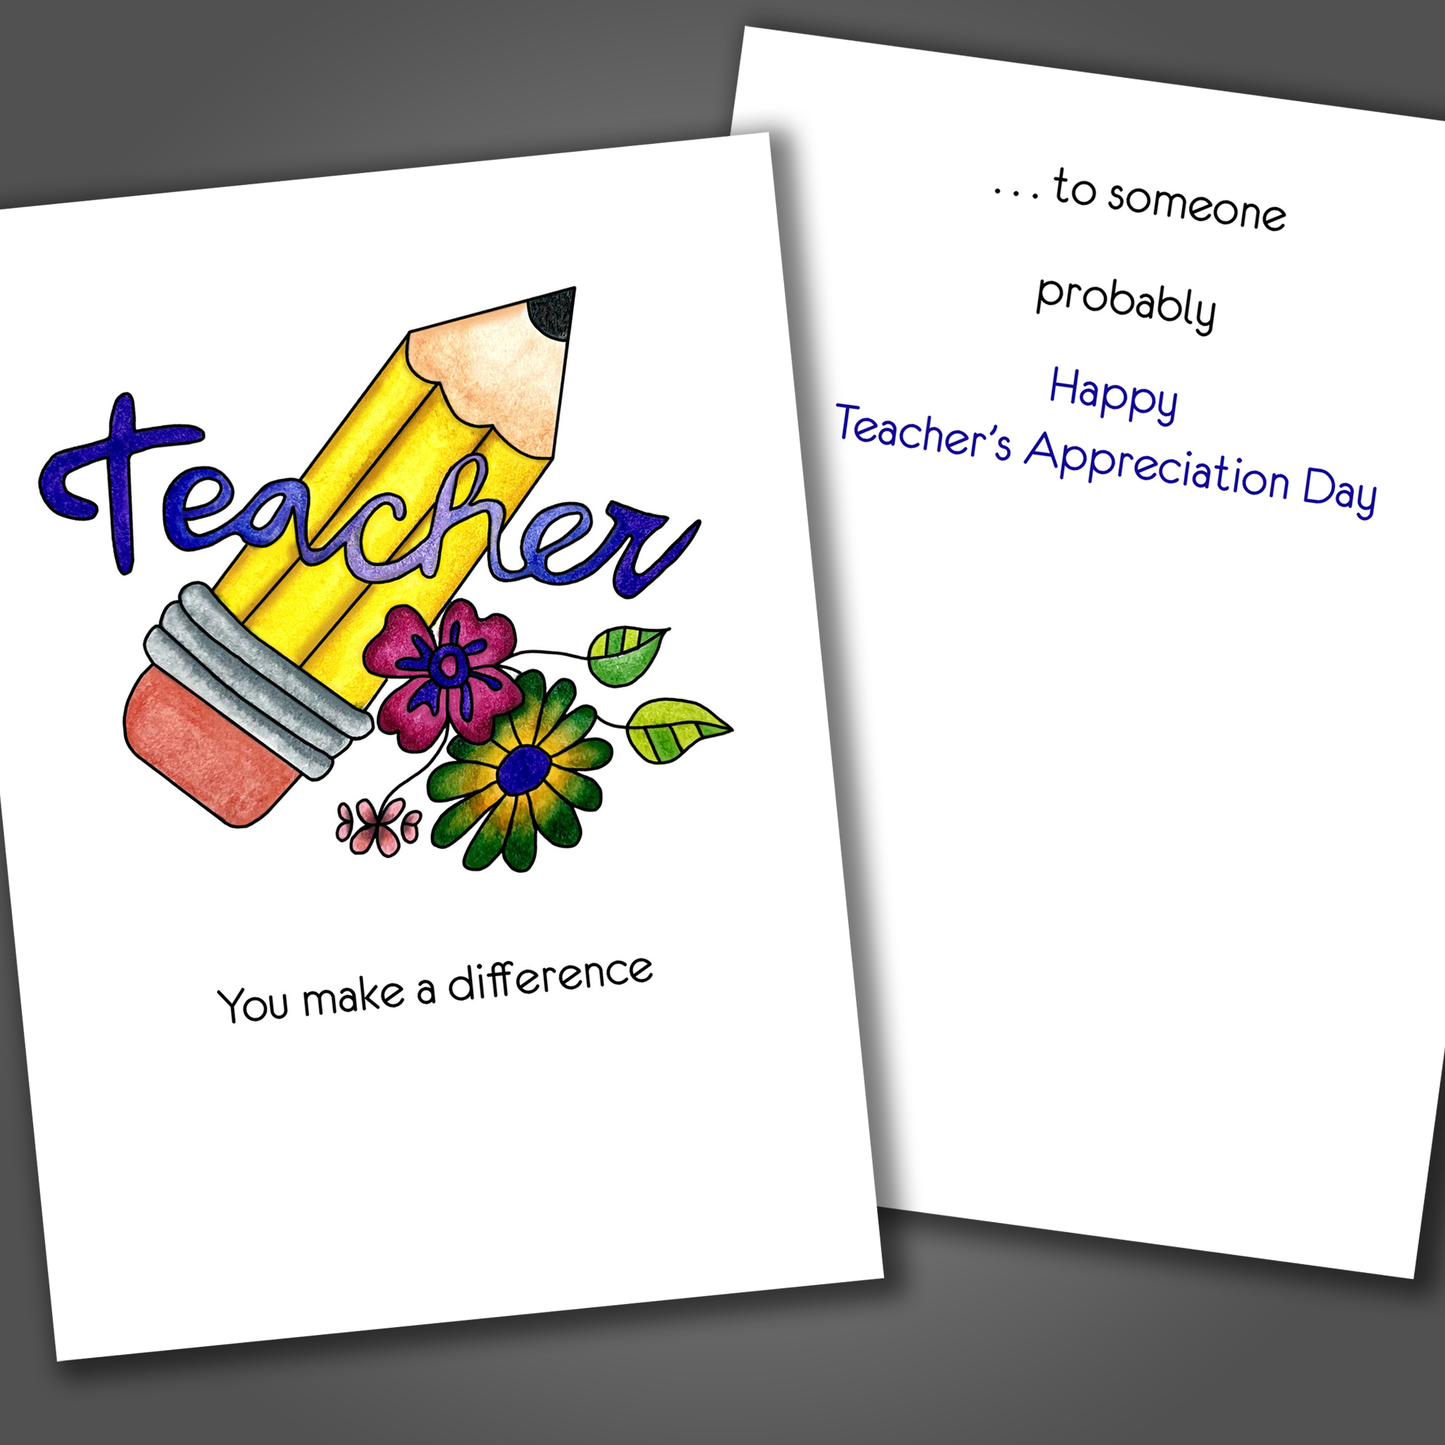 Funny Teacher Appreciation card with teacher drawn on the front of the card. Inside is a funny joke that says you make a difference ....probably.